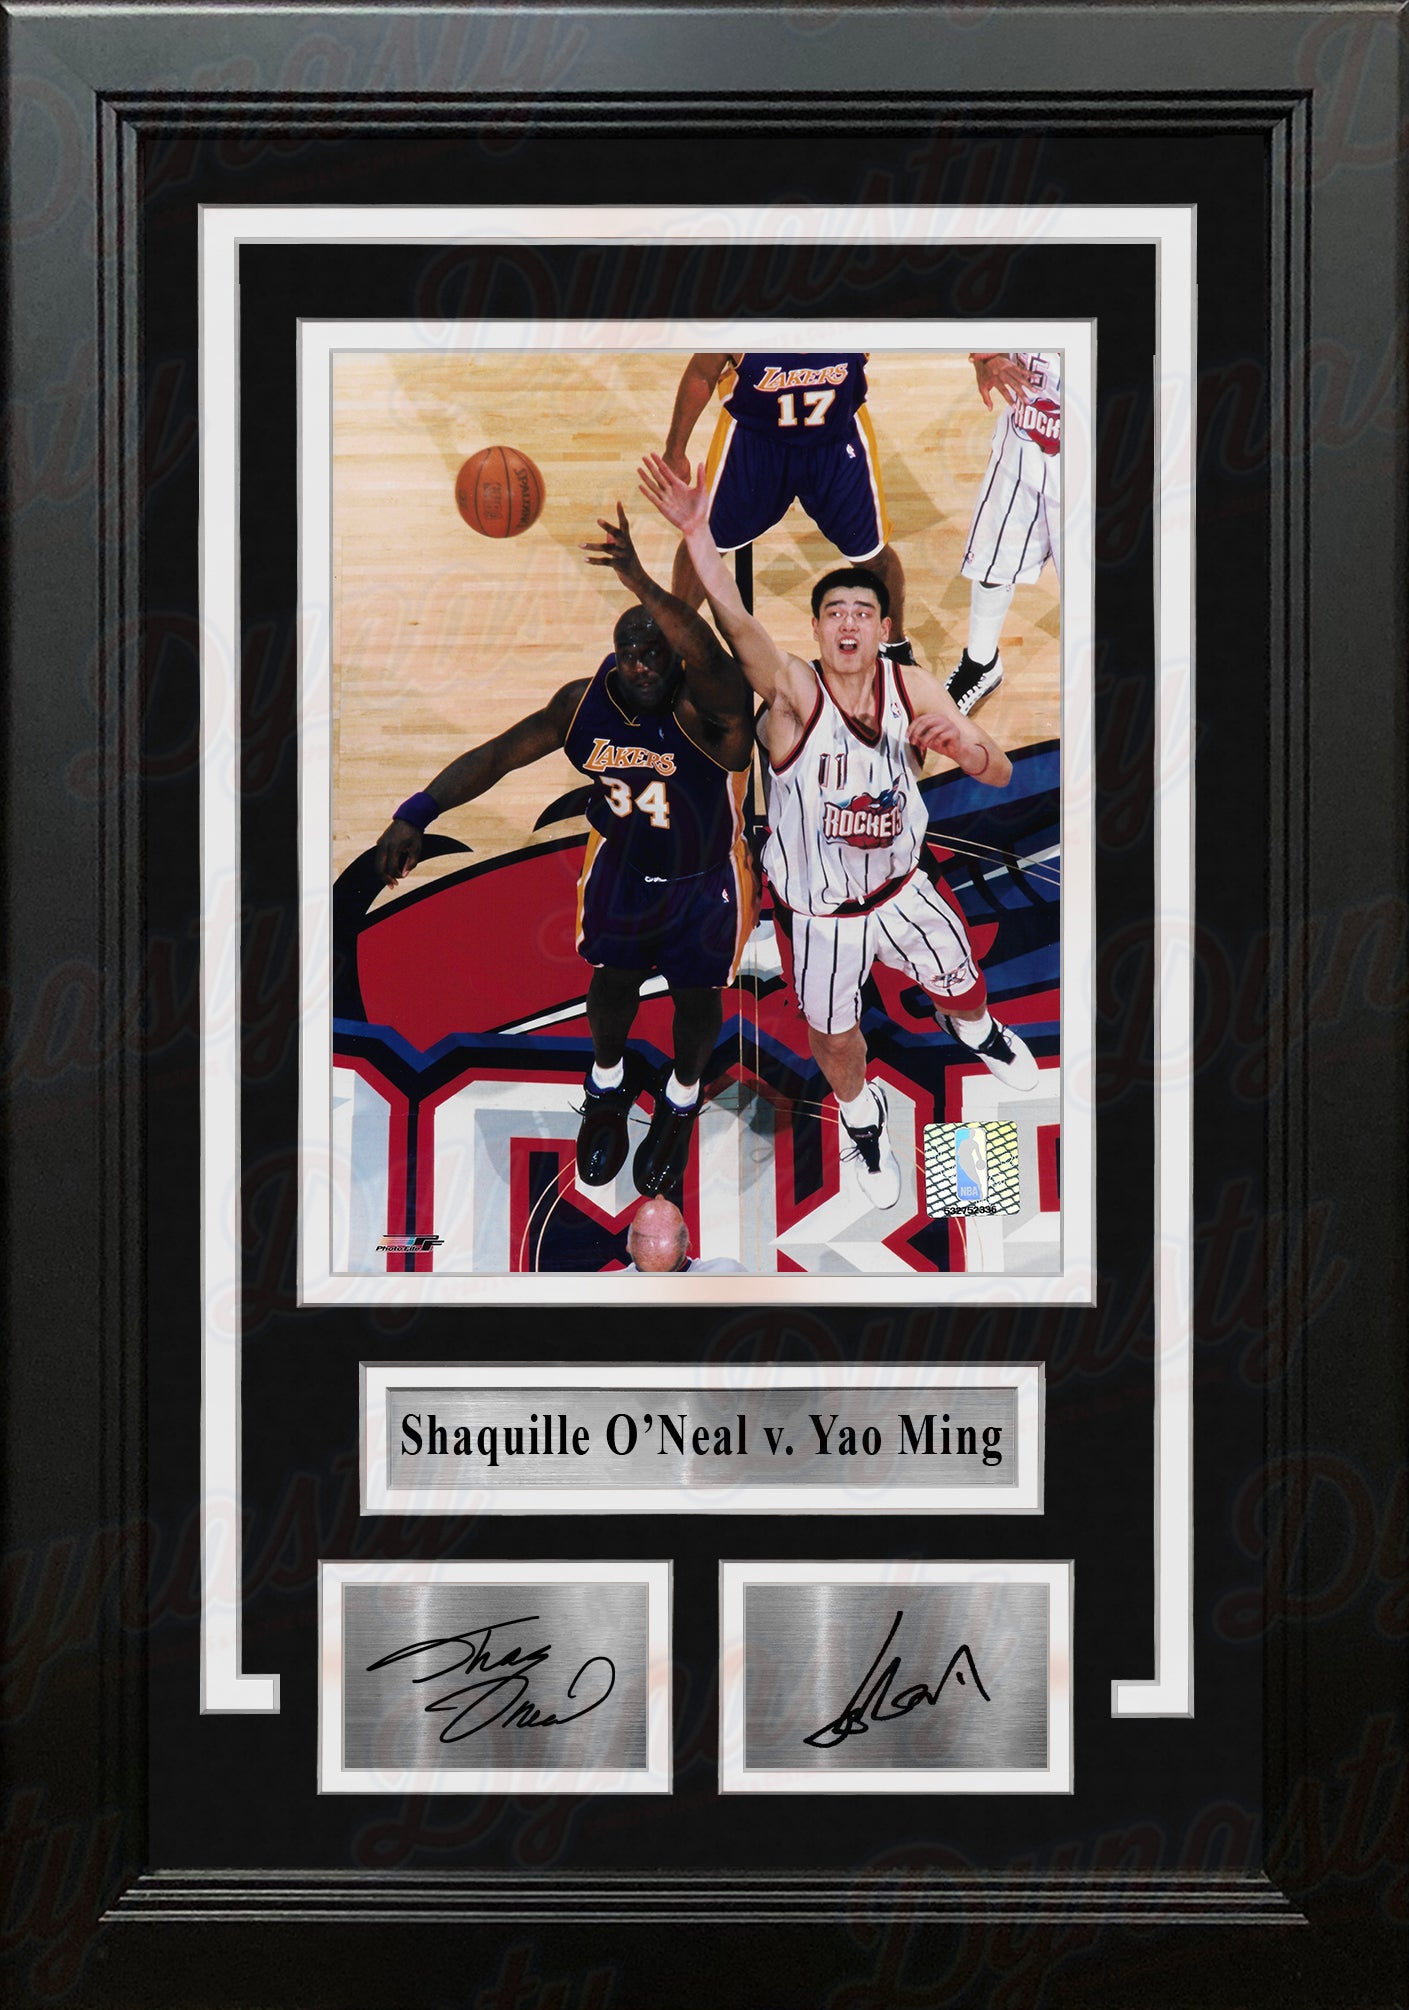 Shaquille O'Neal v. Yao Ming 8" x 10" Framed Basketball Photo with Engraved Autographs - Dynasty Sports & Framing 